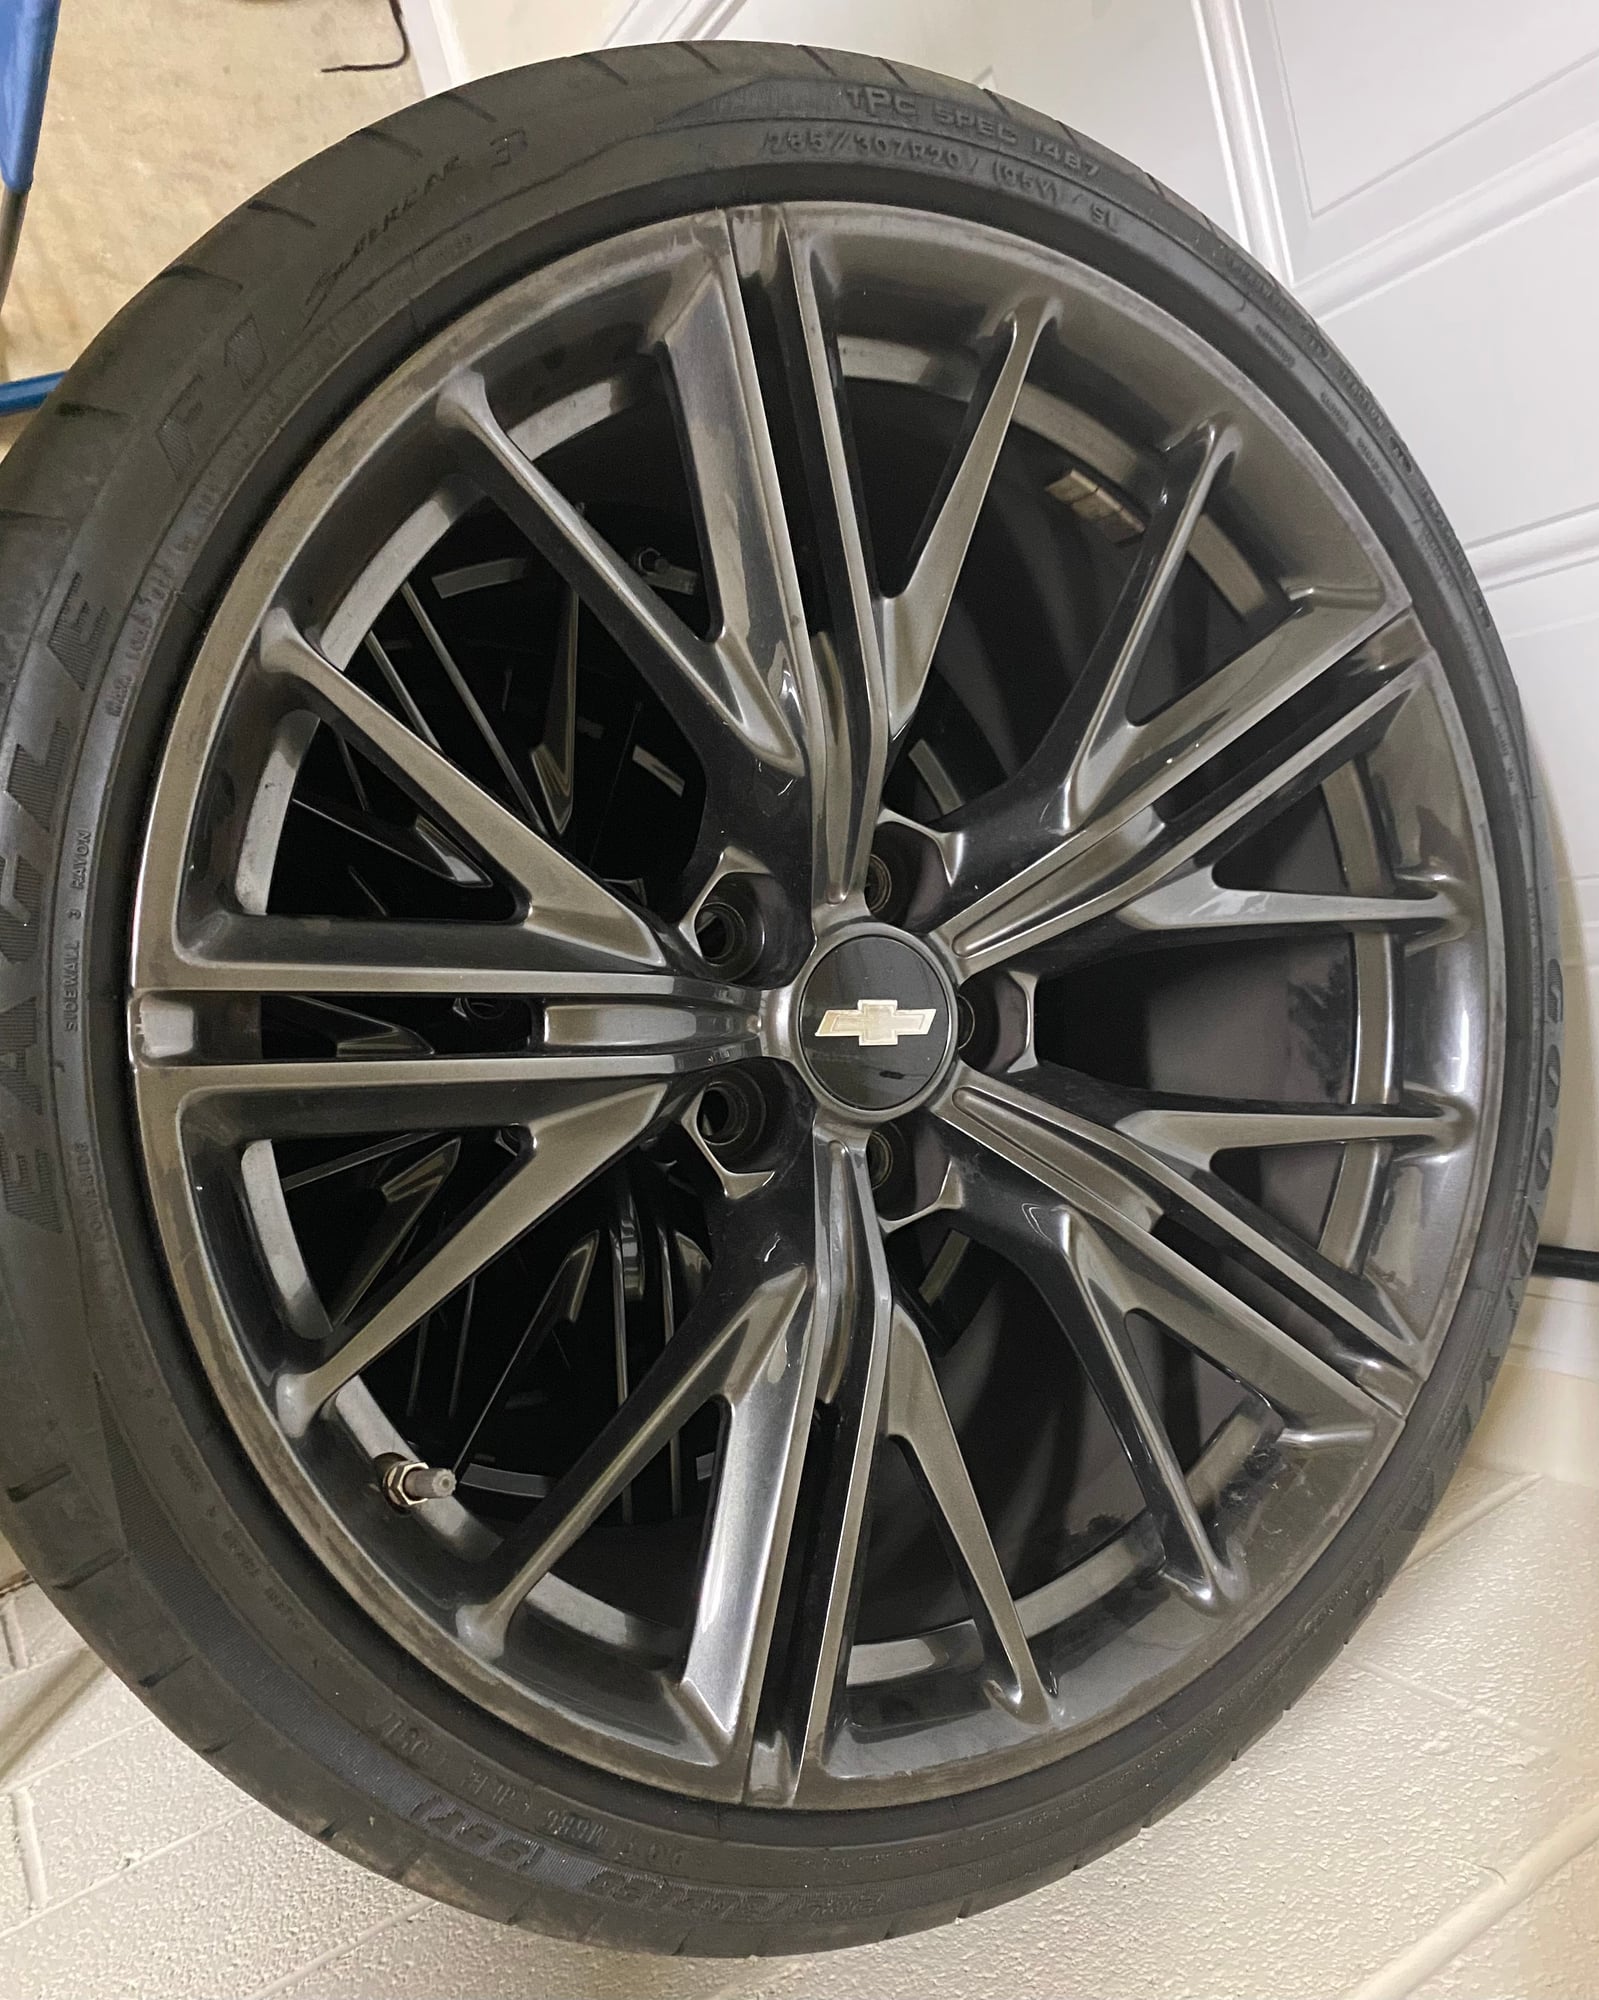 Wheels and Tires/Axles - 2018 Camaro Zl1 Factory 20 inch Wheels takeoff 17k miles - Used - All Years Any Make All Models - Asheville, NC 28804, United States